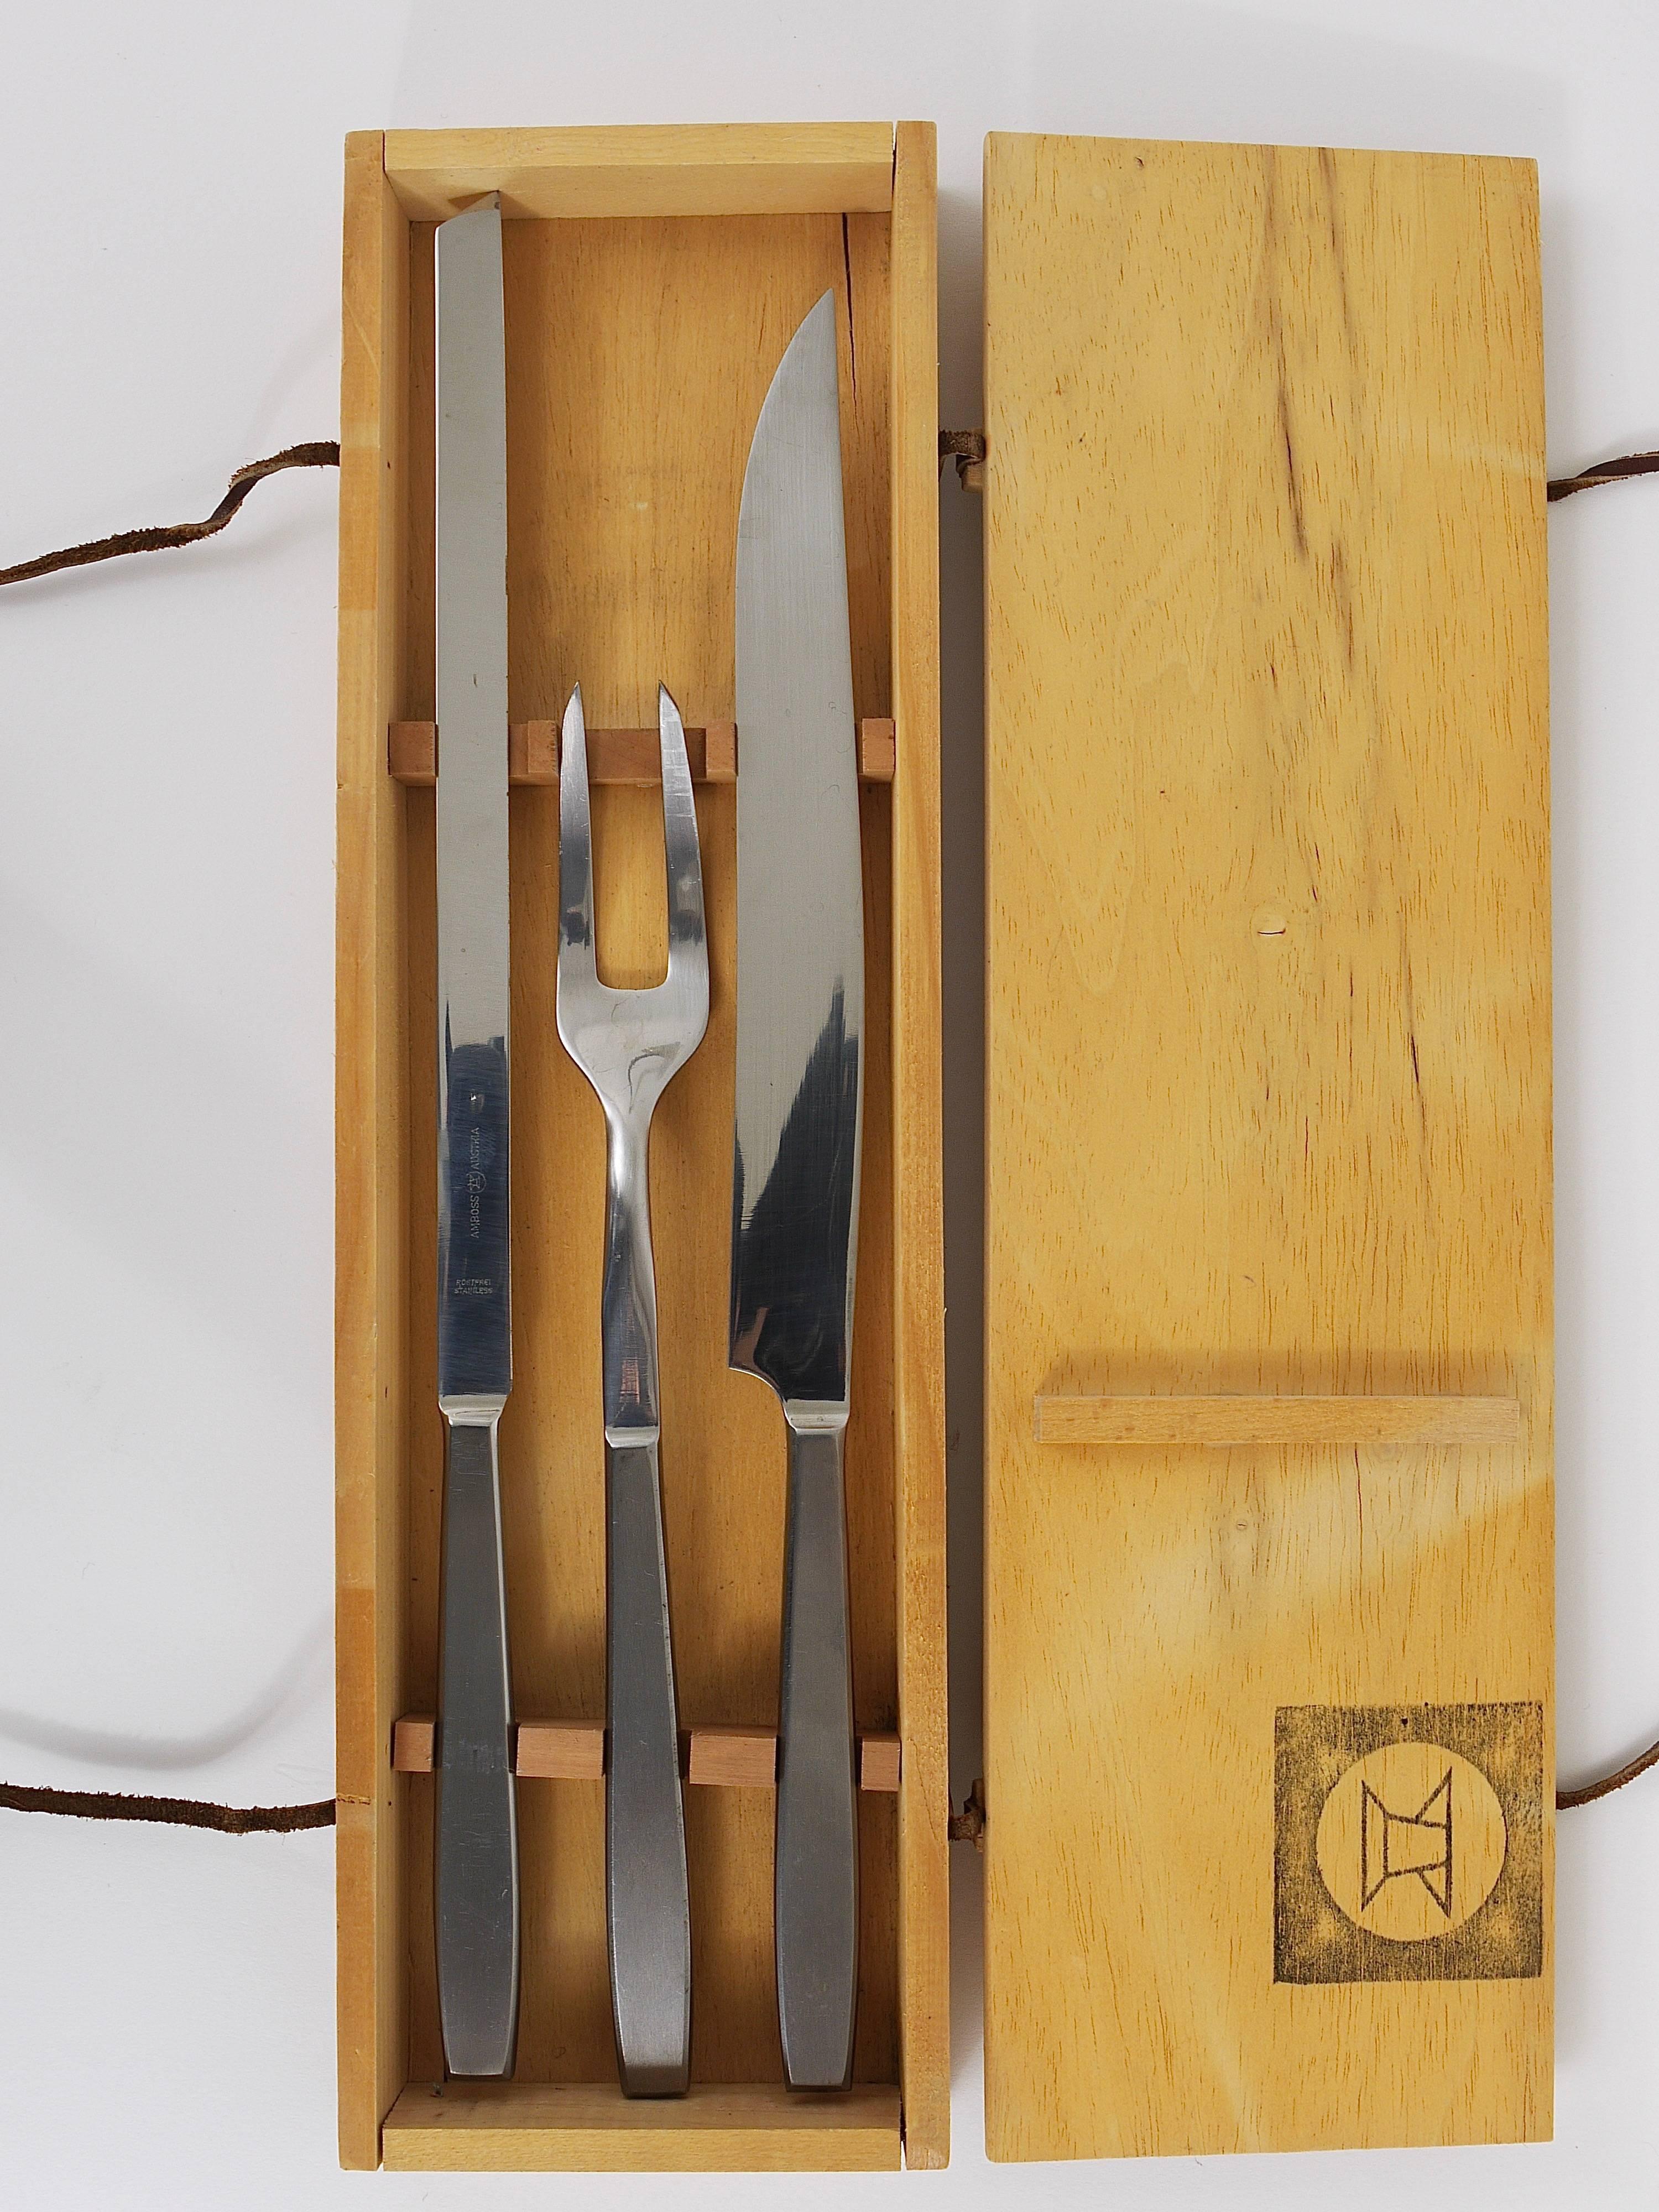 A beautiful midcentury Austrian carving set, consisting of caring knive, a meat knive and a fork in its original award-winning handmade wooden box. Out of the 2050 series, designed by Helmut Alder, executed by Amboss Austria in the 1950s.